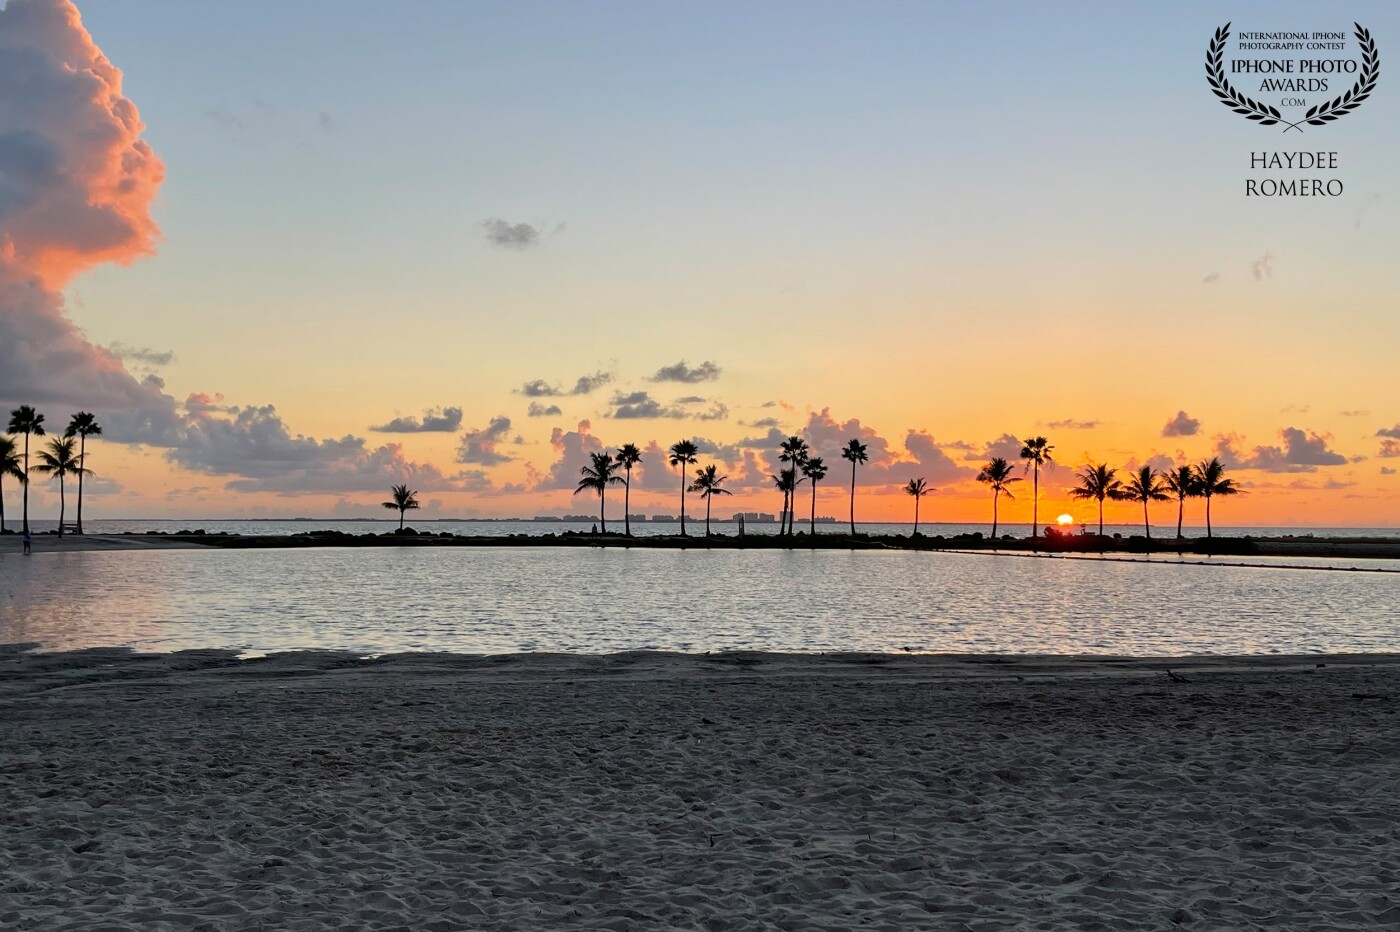 Another beautiful sunrise where  the palm trees rise up against patchy clouds as the sun starts to come out in Matheson Hammock Park in south Miami, Florida.